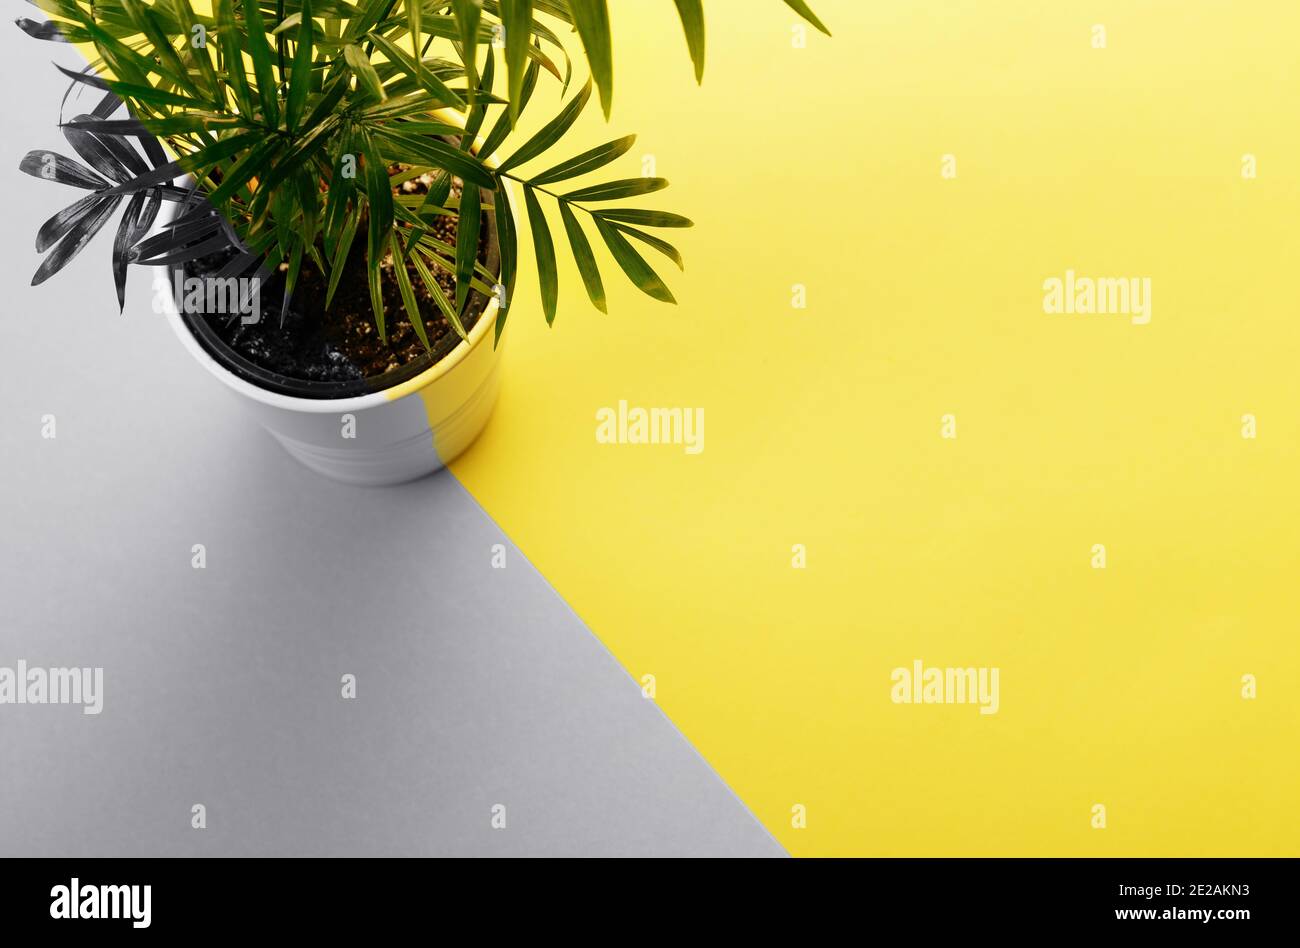 Tropical palm tree in a pot with free space, text box. Flat lay, nature concept, layout. Colors of the Year 2021 gray and yellow Stock Photo